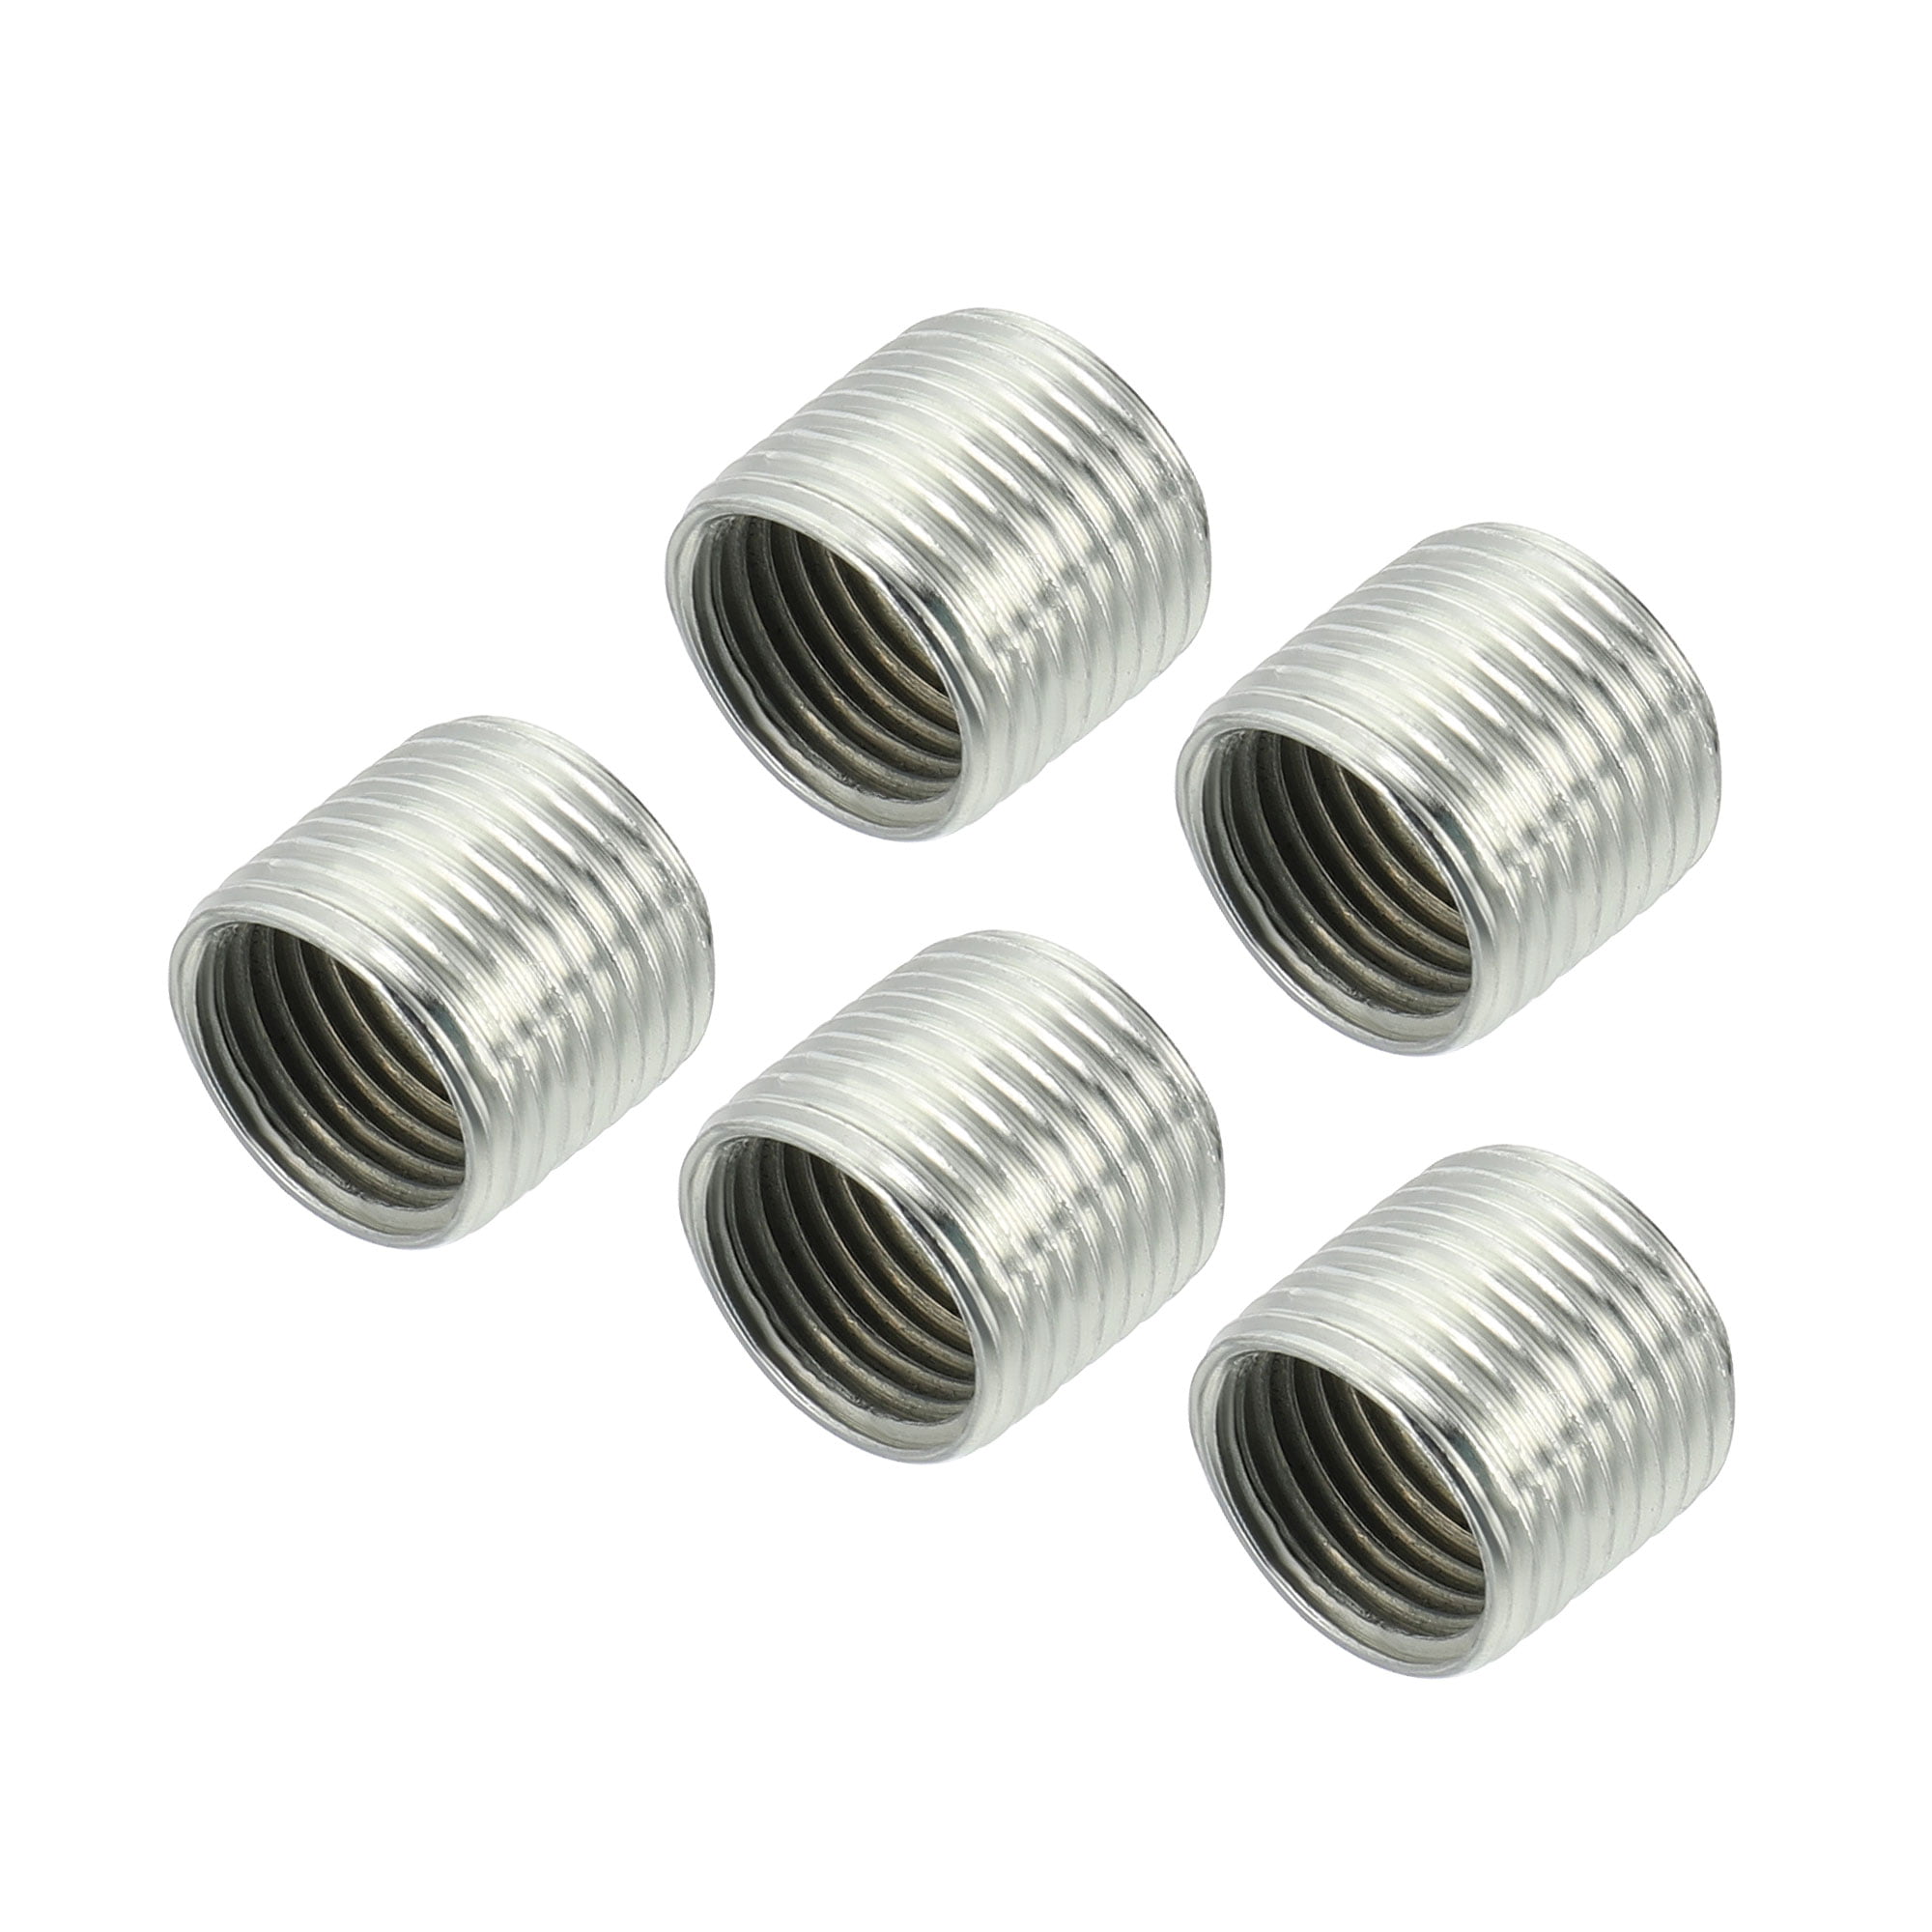 M10 10MM MALE TO M8 8MM FEMALE 10 X THREAD ADAPTERS THREADED REDUCERS 